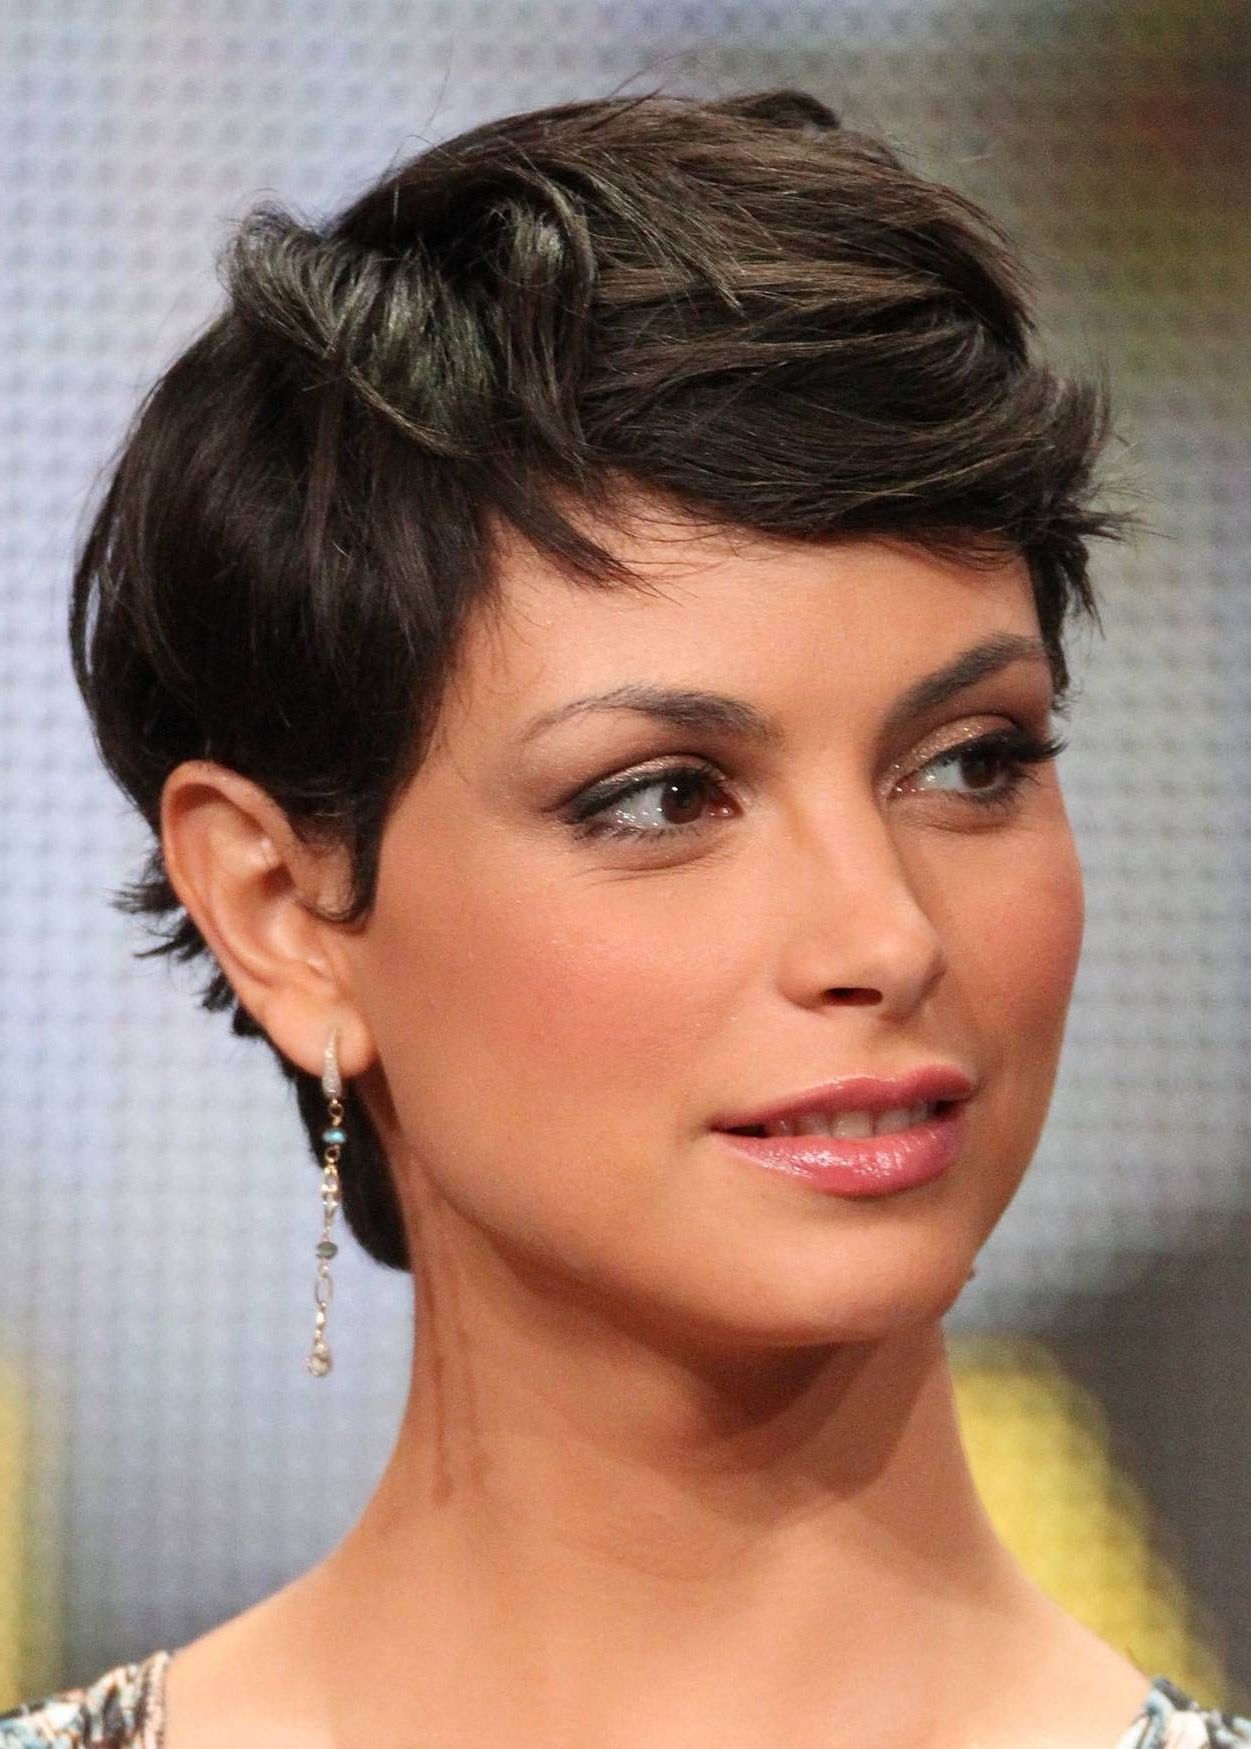 Pixie Hair Photos | Short Haircuts: Celebrities With Short Pixie Regarding Short Haircuts For Celebrities (View 19 of 25)